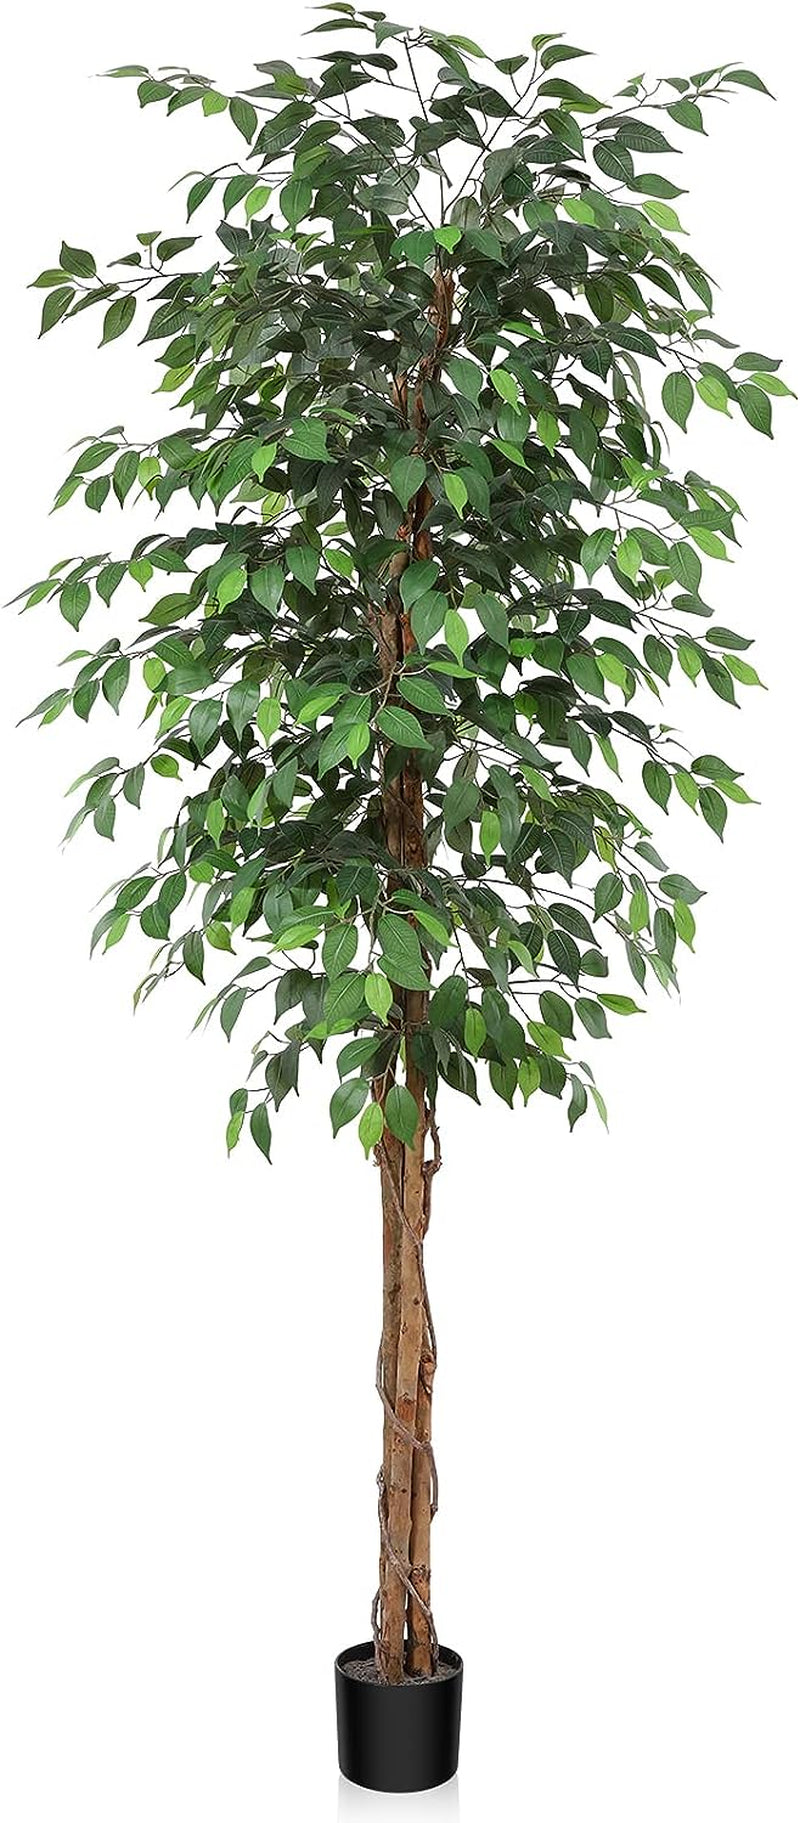 OAKRED 7FT Silk Artificial Ficus Tree with Realistic Leaves and Natural Trunk Fake Plants Tall Fake Tree Faux Ficus Tree for Office House Living Room Home Decor Indoor Outdoor,Set of 1  OAKRED   